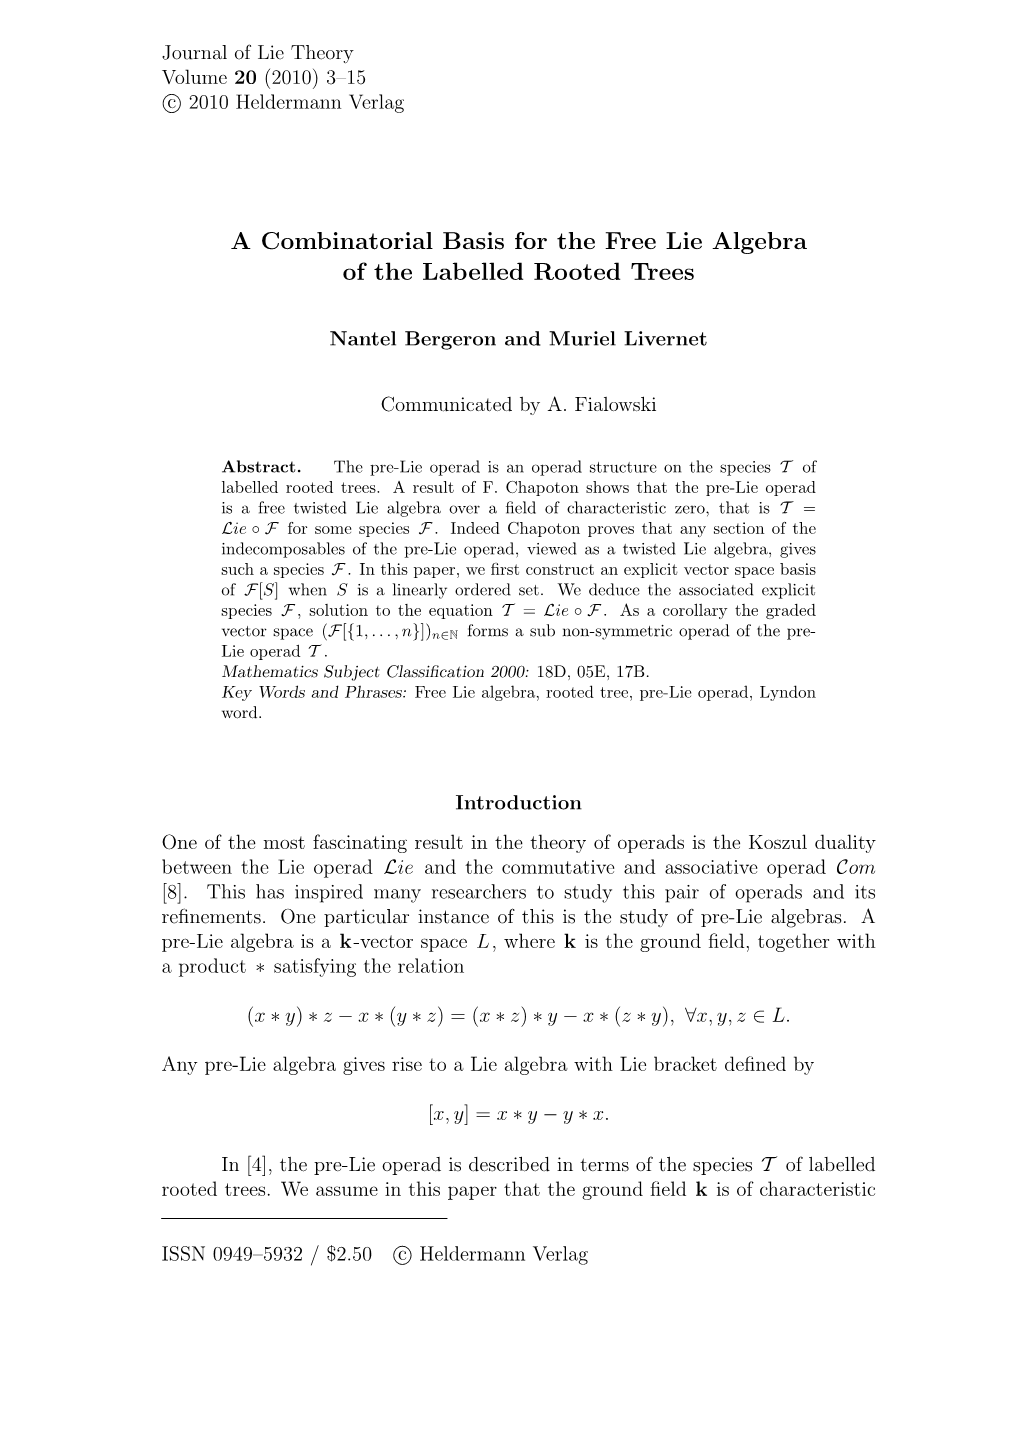 A Combinatorial Basis for the Free Lie Algebra of the Labelled Rooted Trees